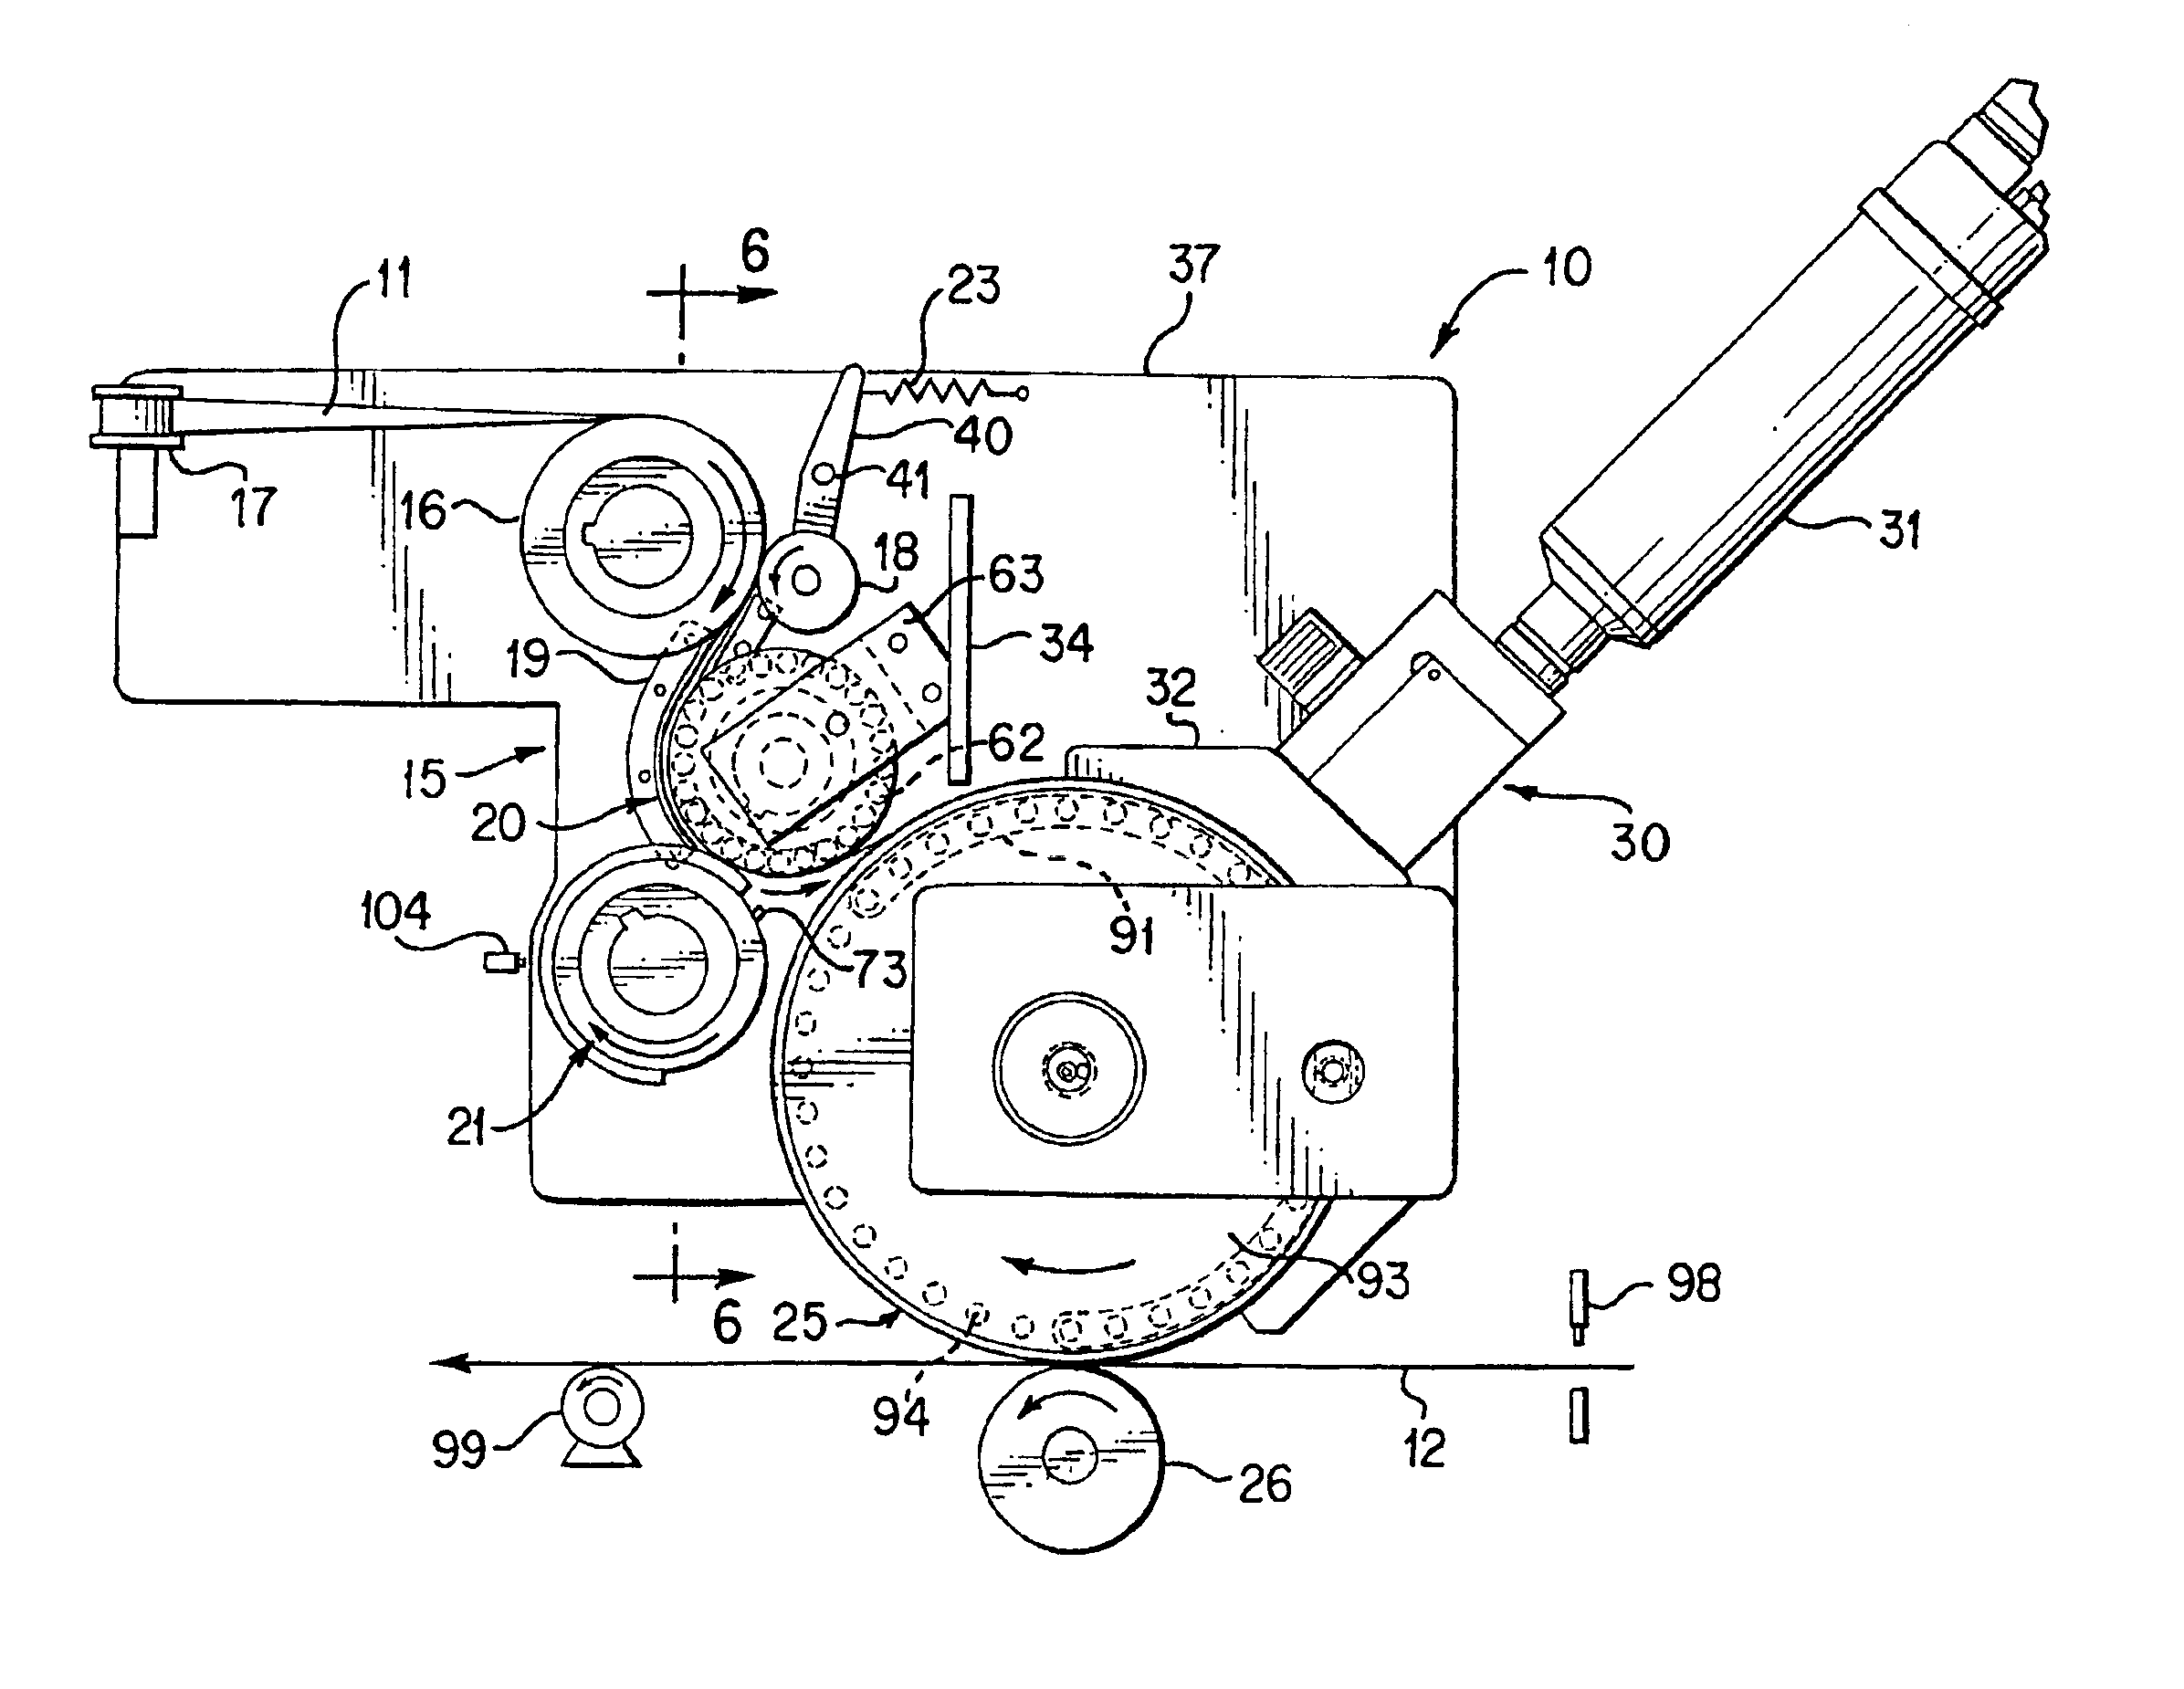 Web material advance system for web material applicator